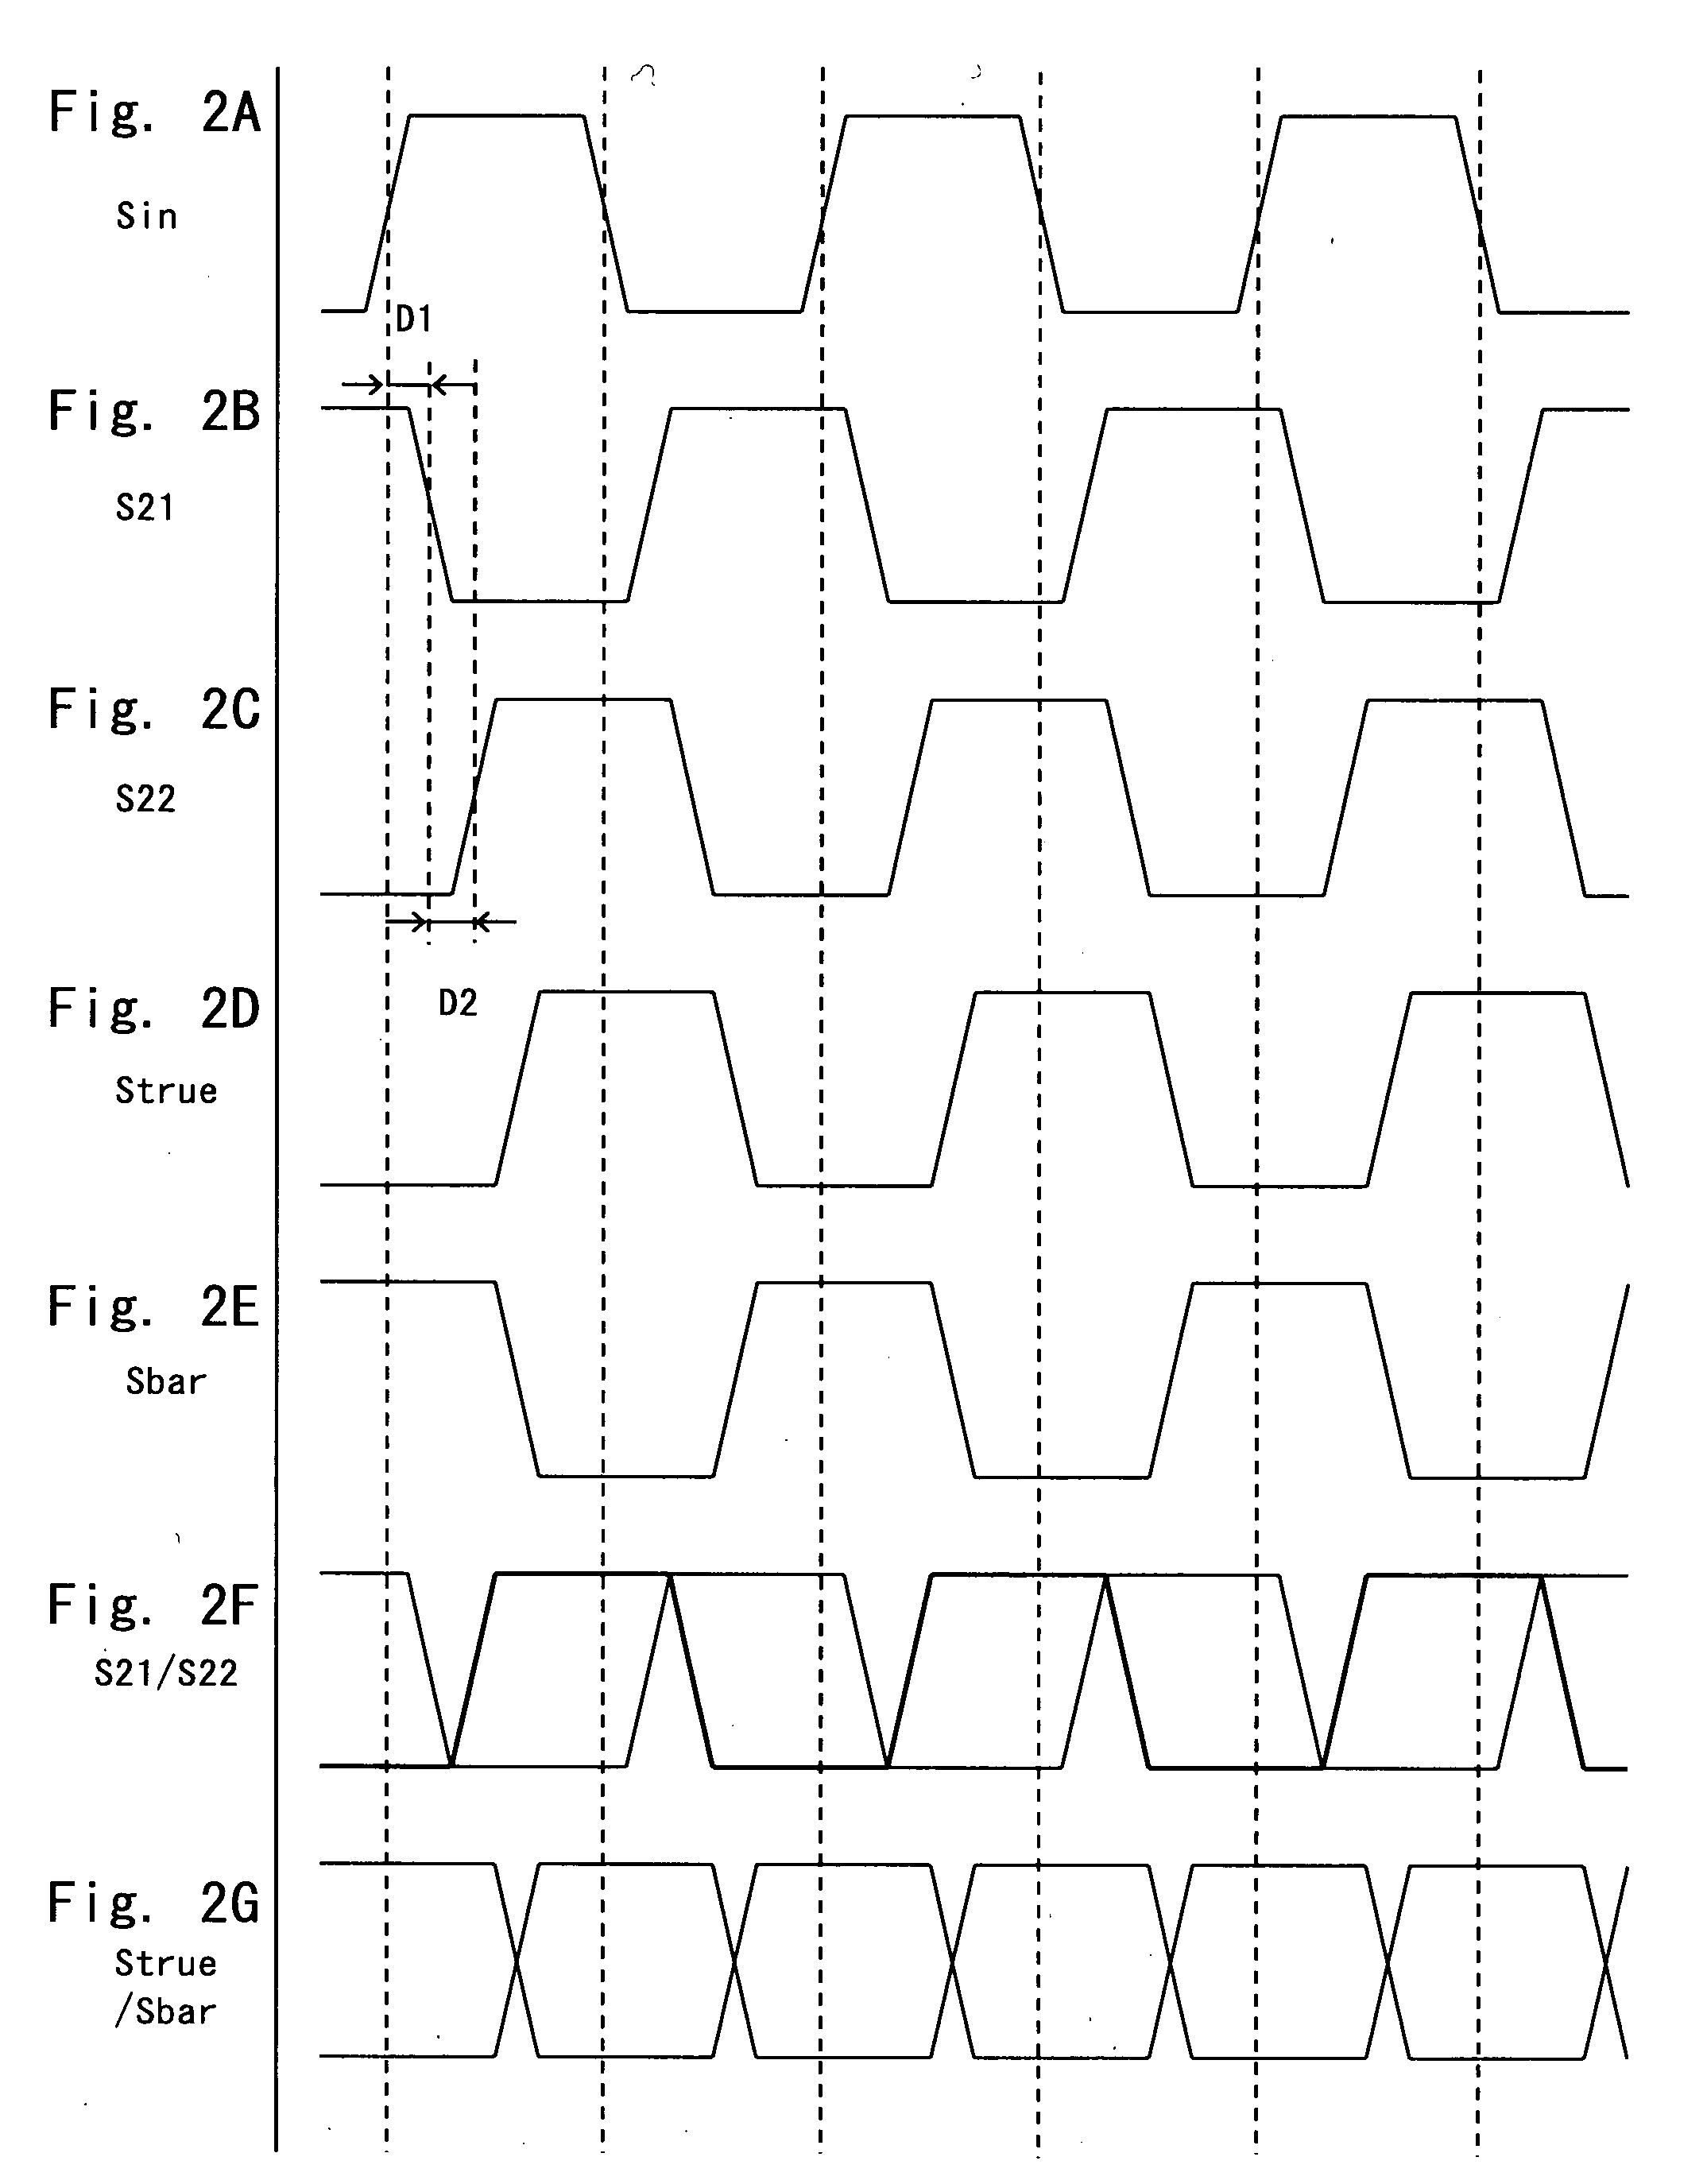 Complementary signal generating circuit